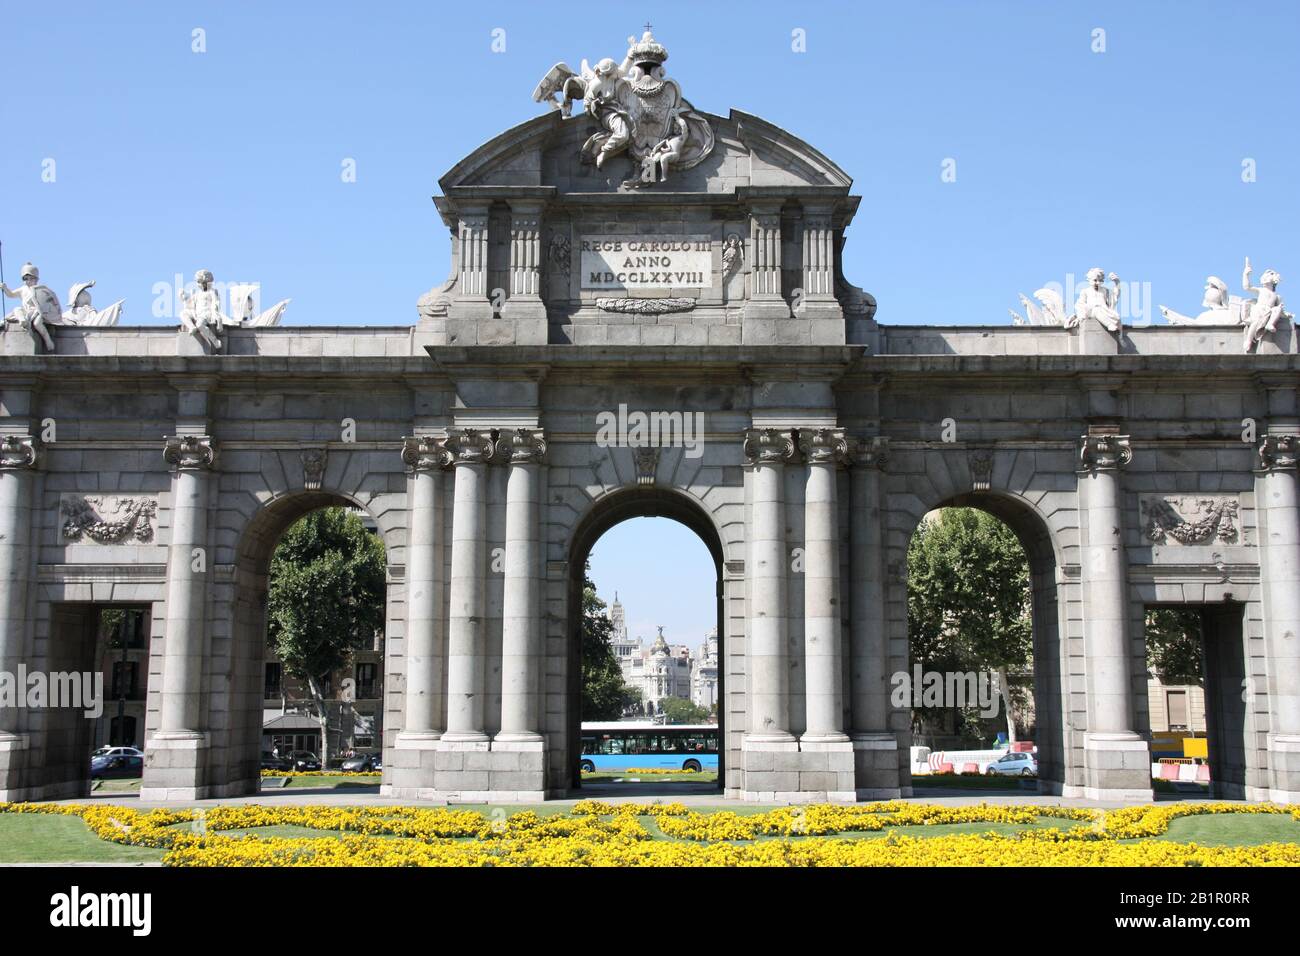 Puerta de Alcala - a Neo-classical monument in the Plaza de la Independencia (Independence Square) in Madrid, Spain Stock Photo